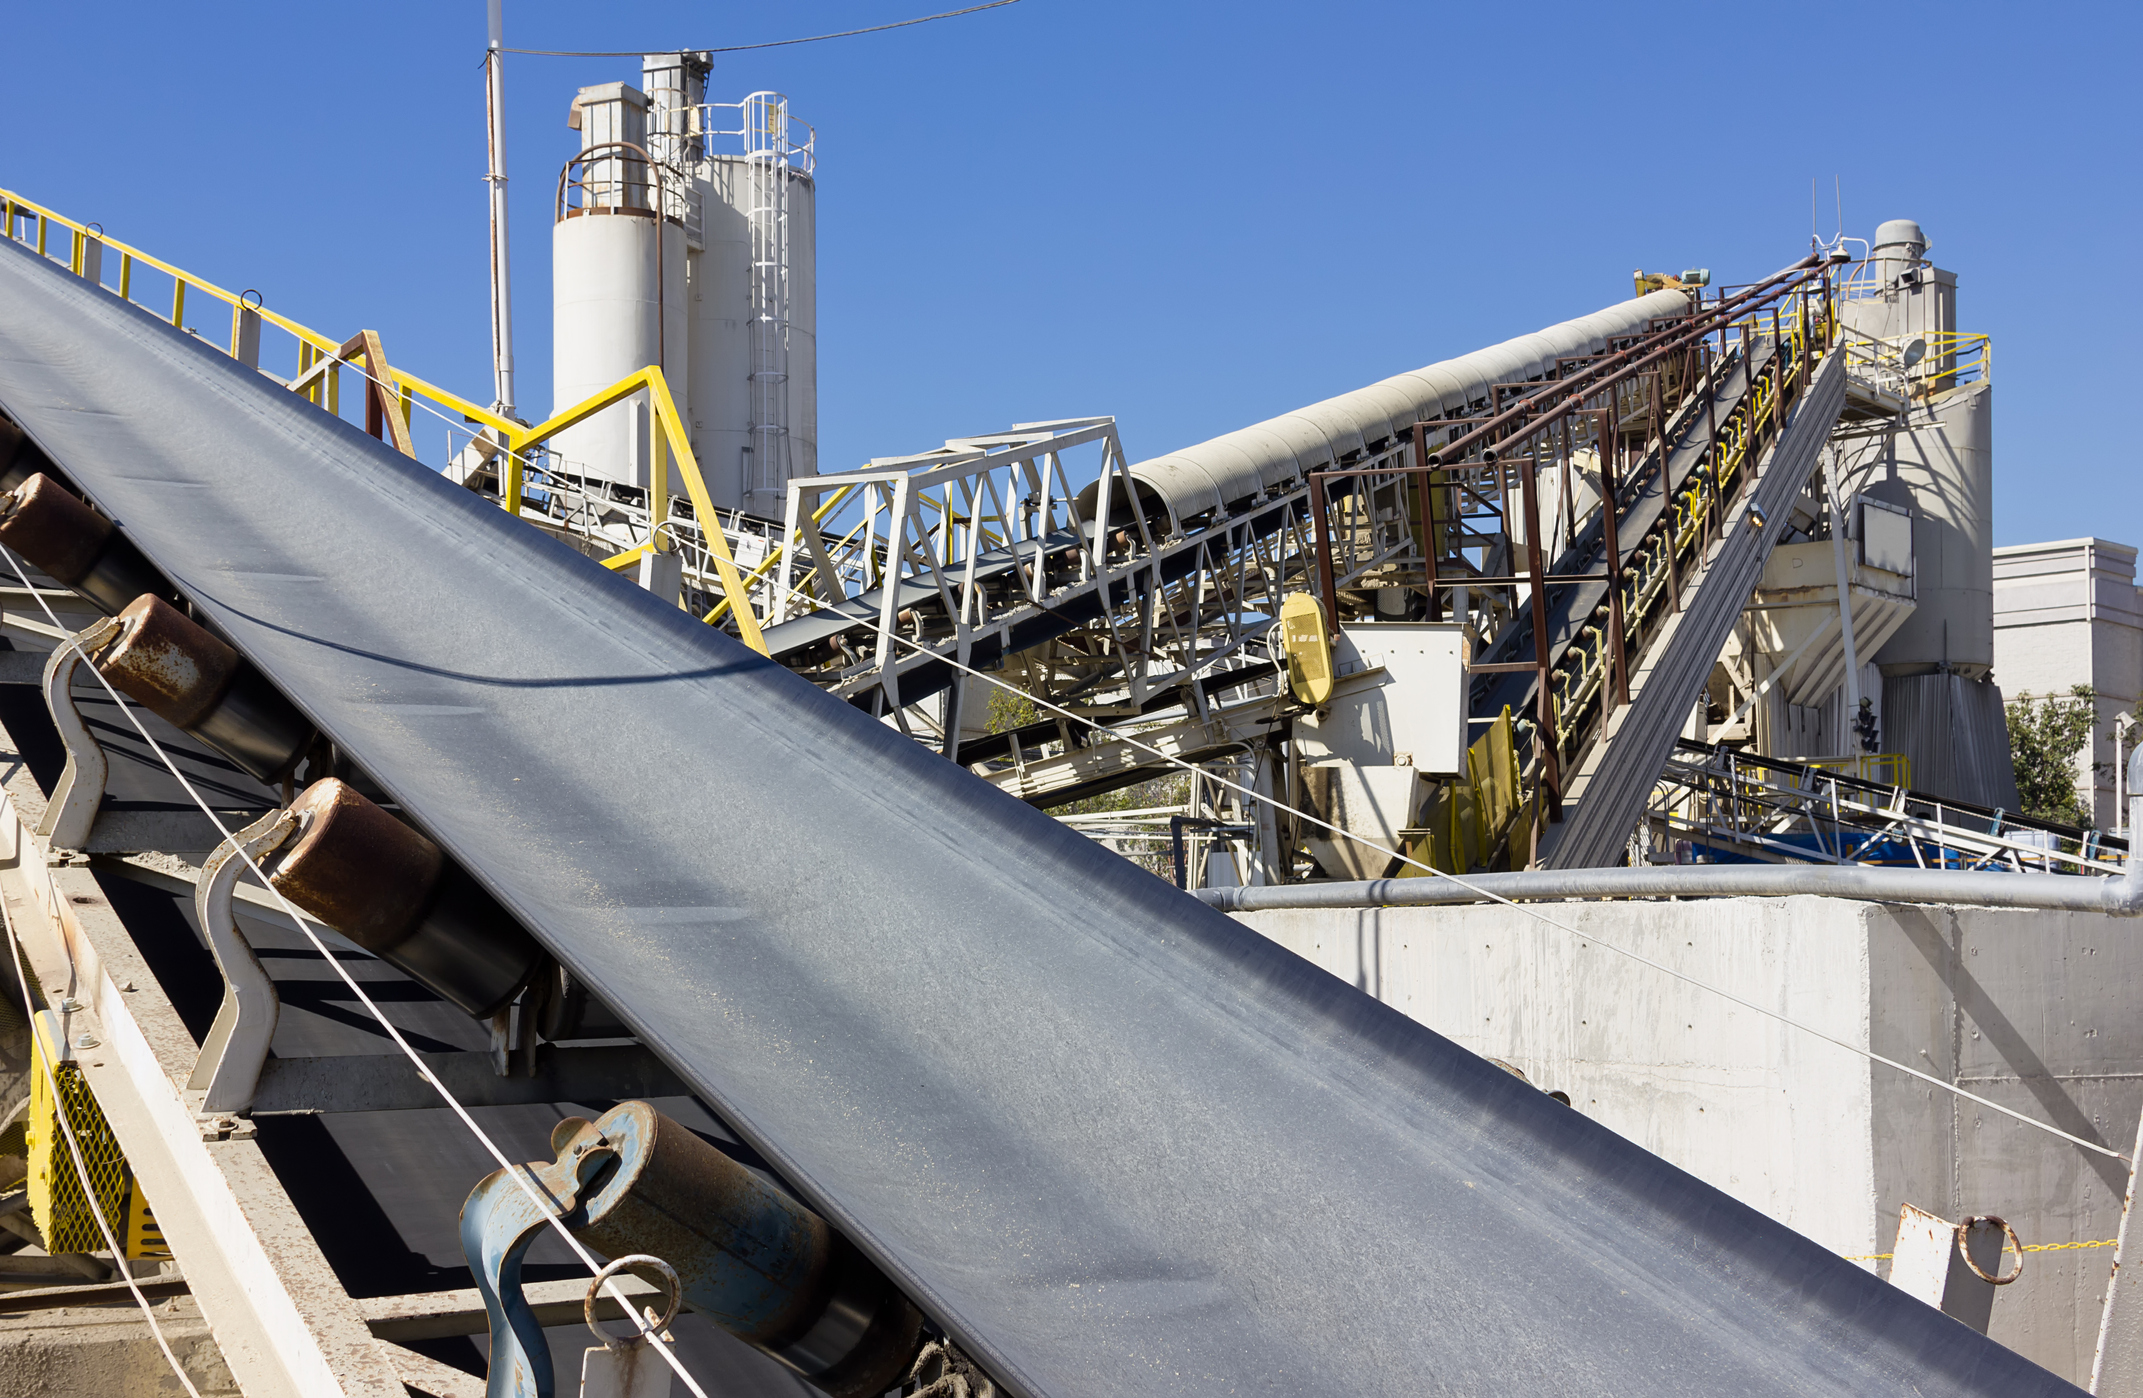 Multiple industrial conveyor belts are used at a processing site.